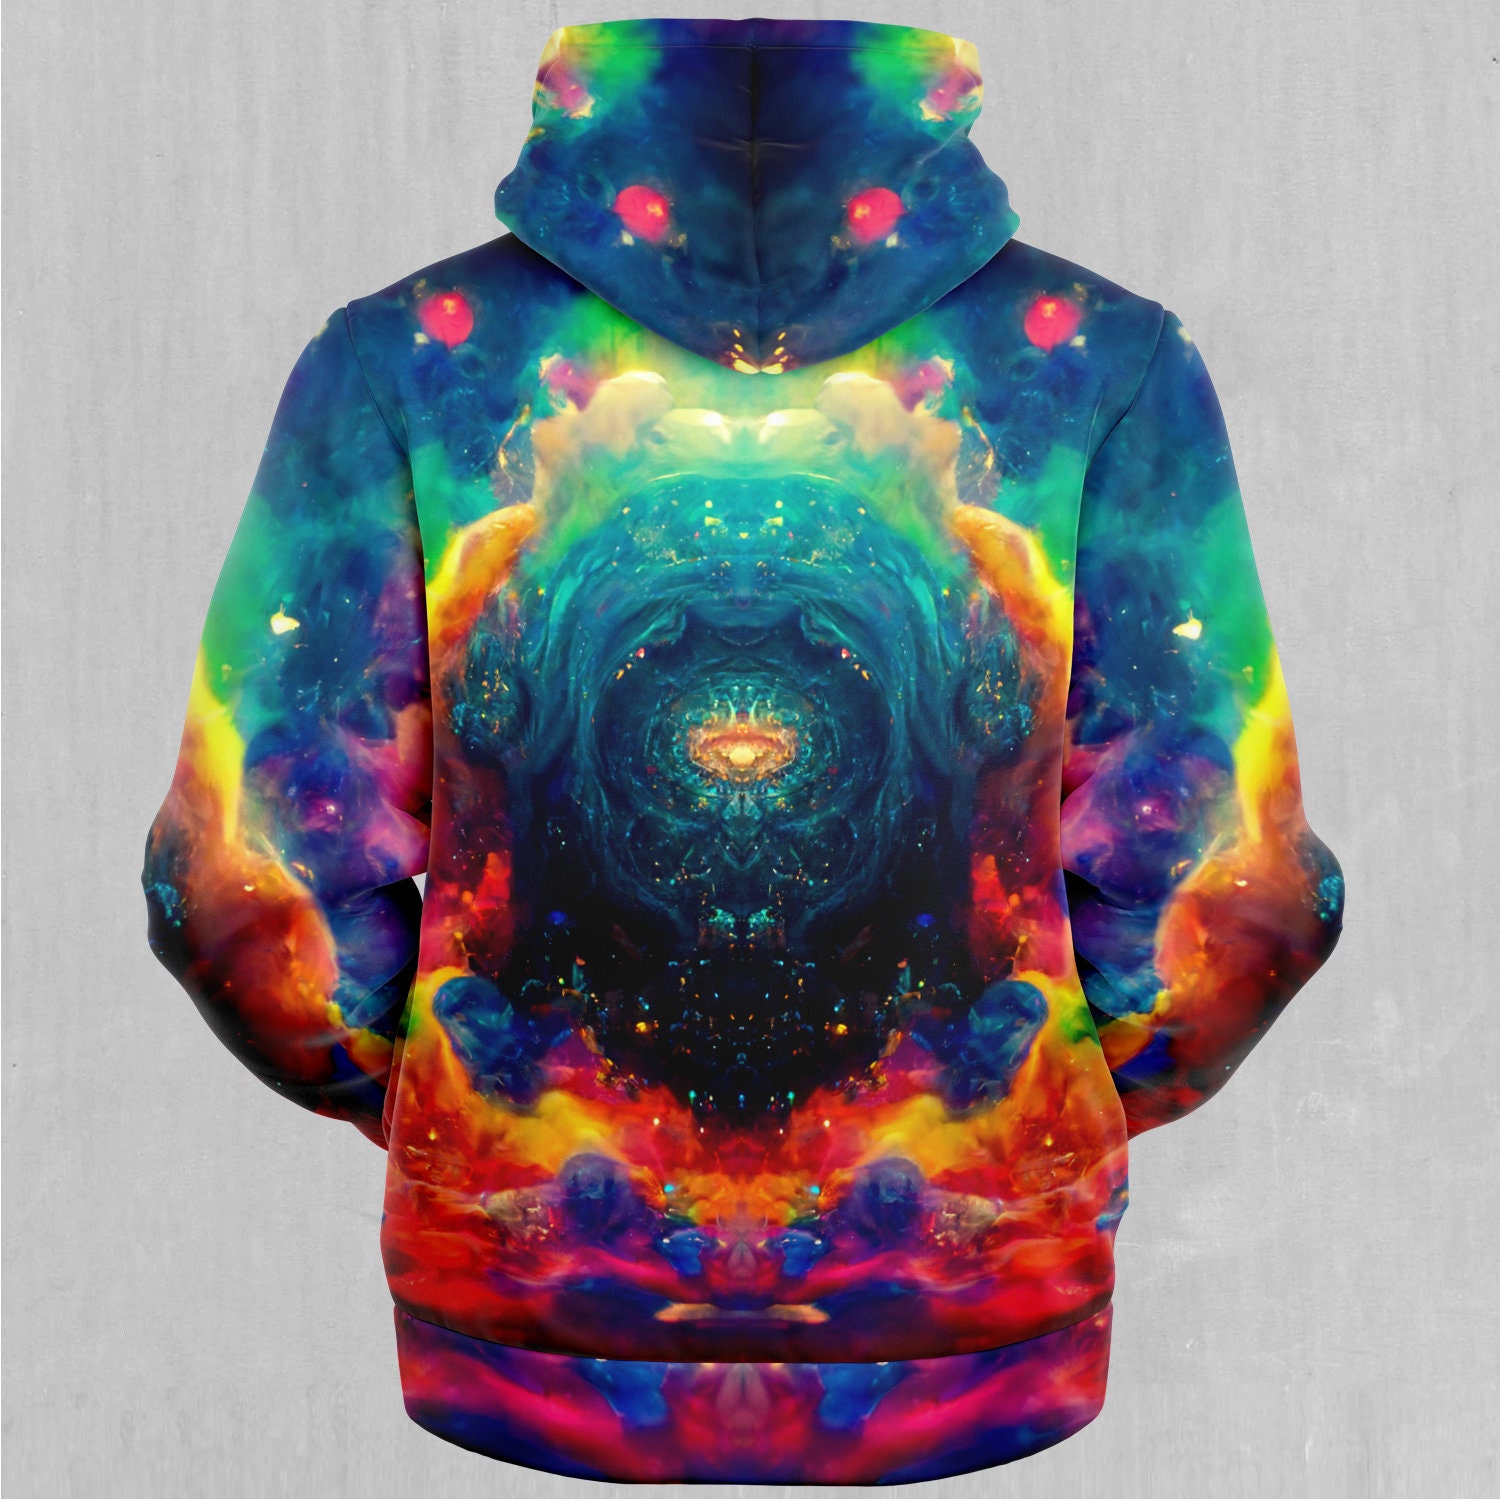 Discover Galactic Eye Psychedelic Galaxy Abstract Trippy Sherpa Microfleece Zip-Up Hoodie